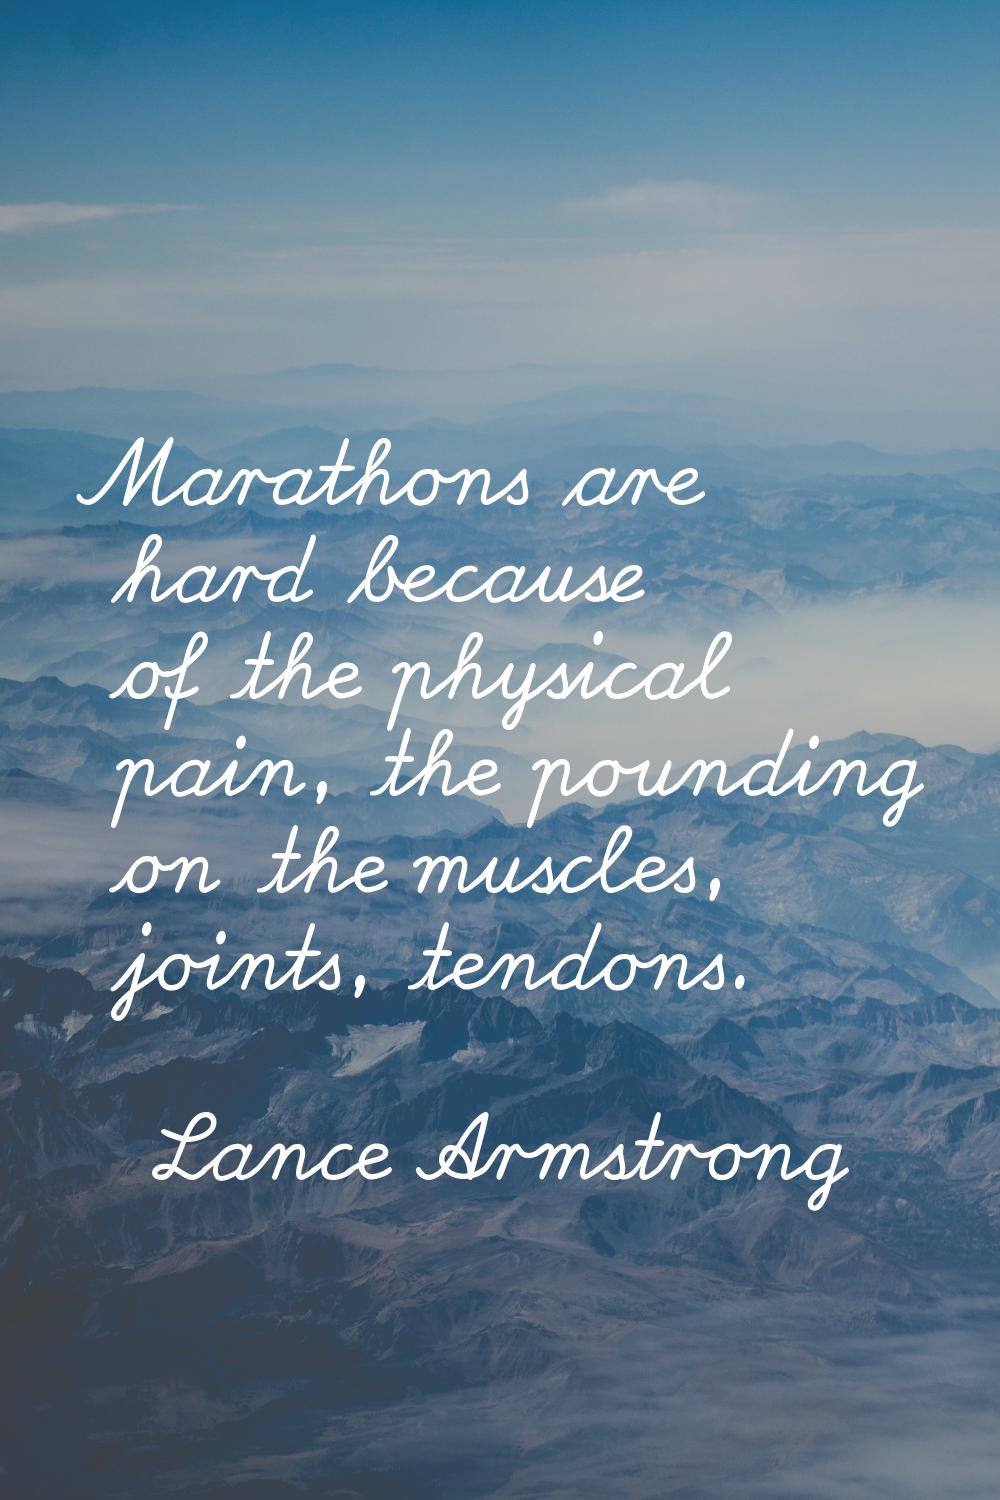 Marathons are hard because of the physical pain, the pounding on the muscles, joints, tendons.